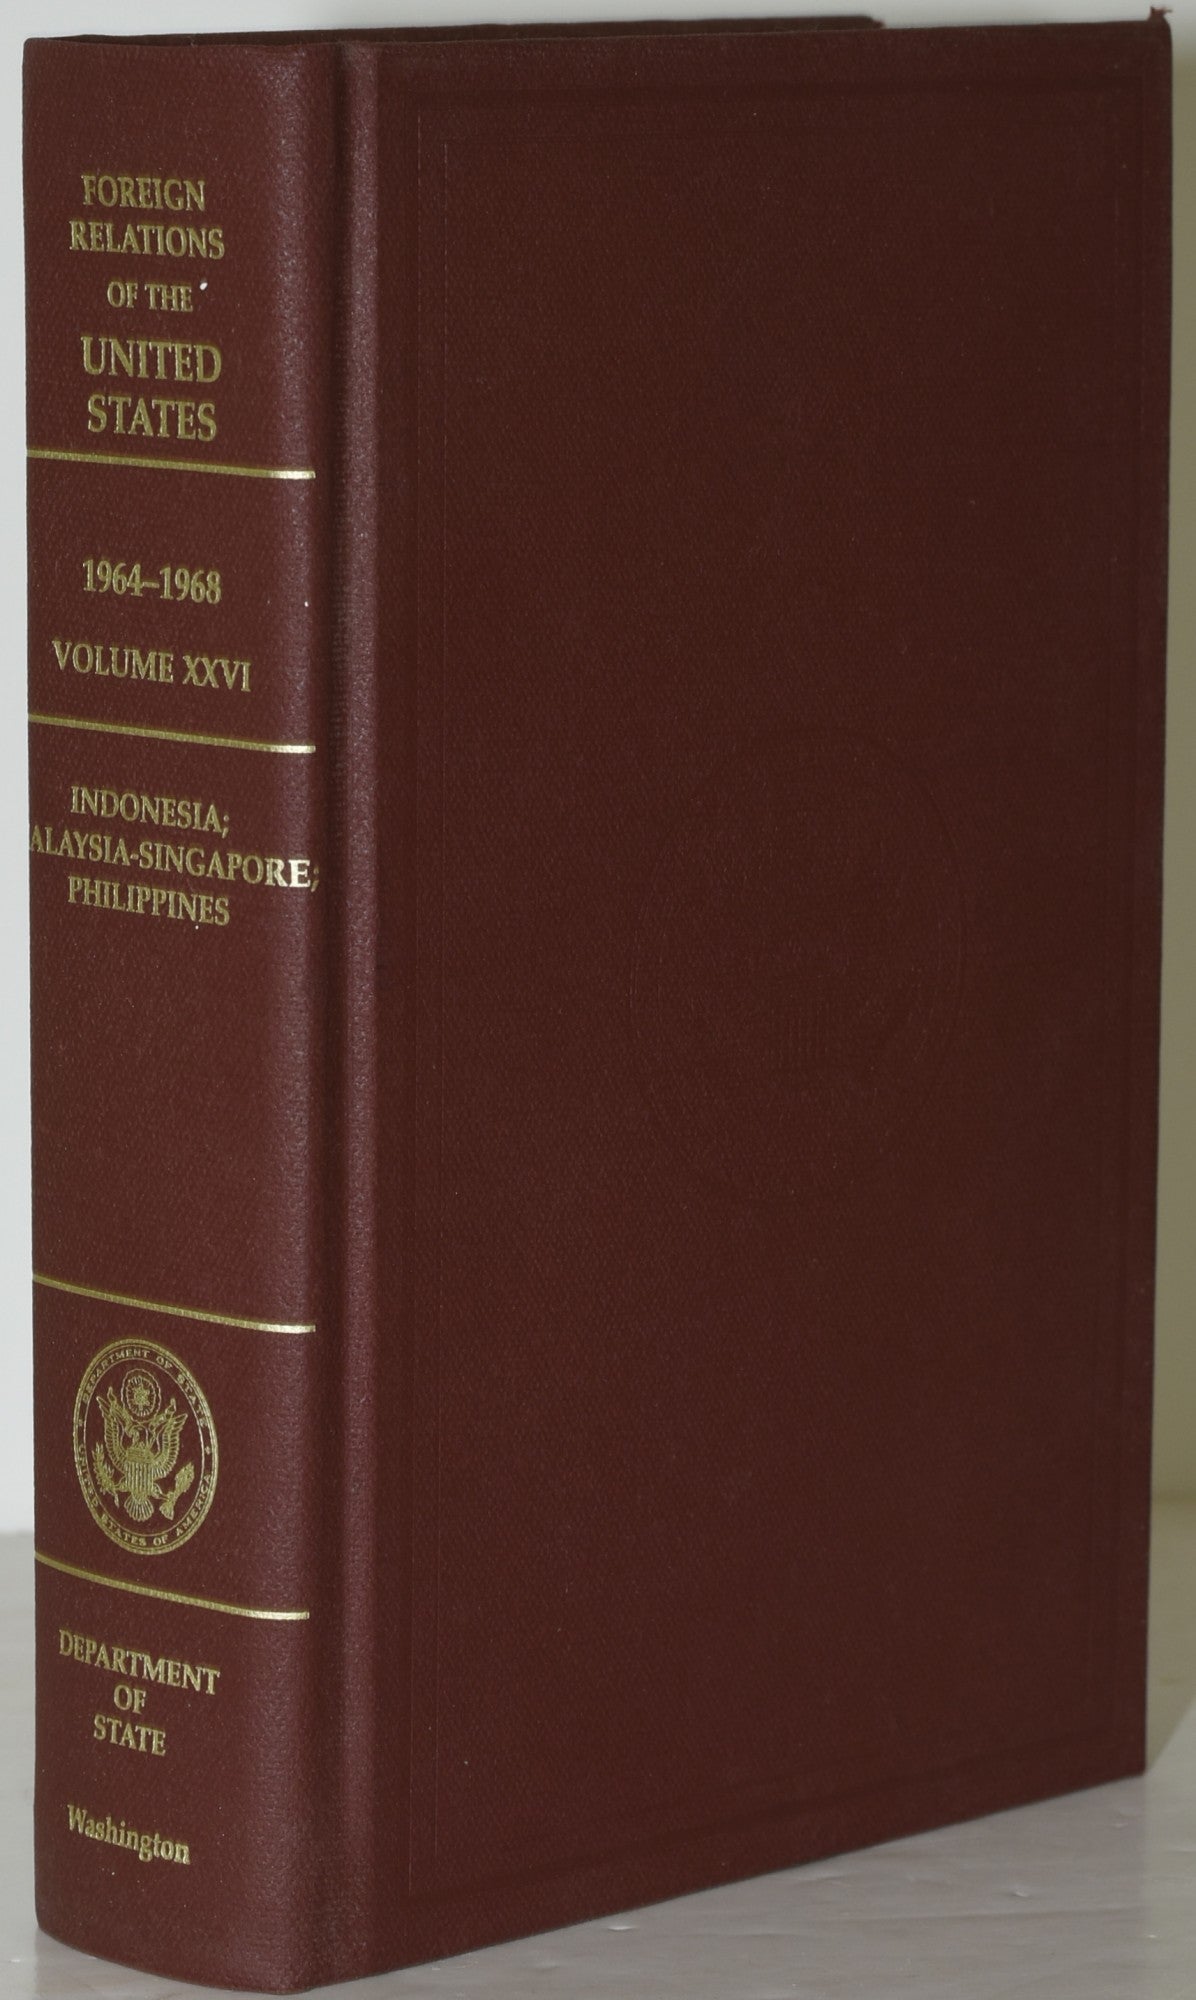 FOREIGN RELATIONS OF THE UNITED STATES, 1964-1968. VOLUME XXVI